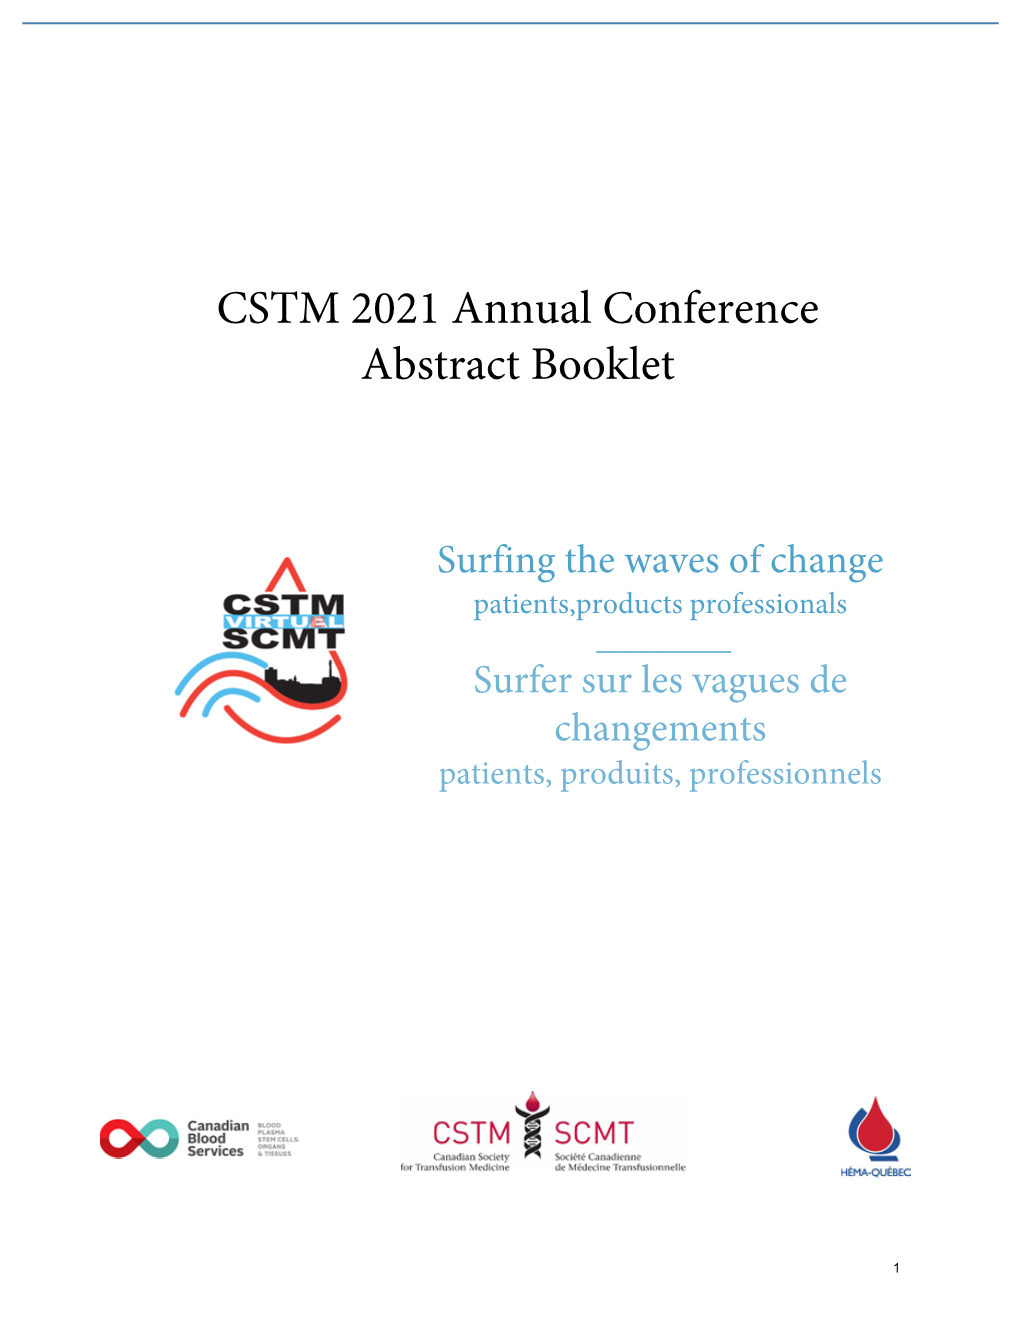 CSTM 2021 Annual Conference Abstract Booklet